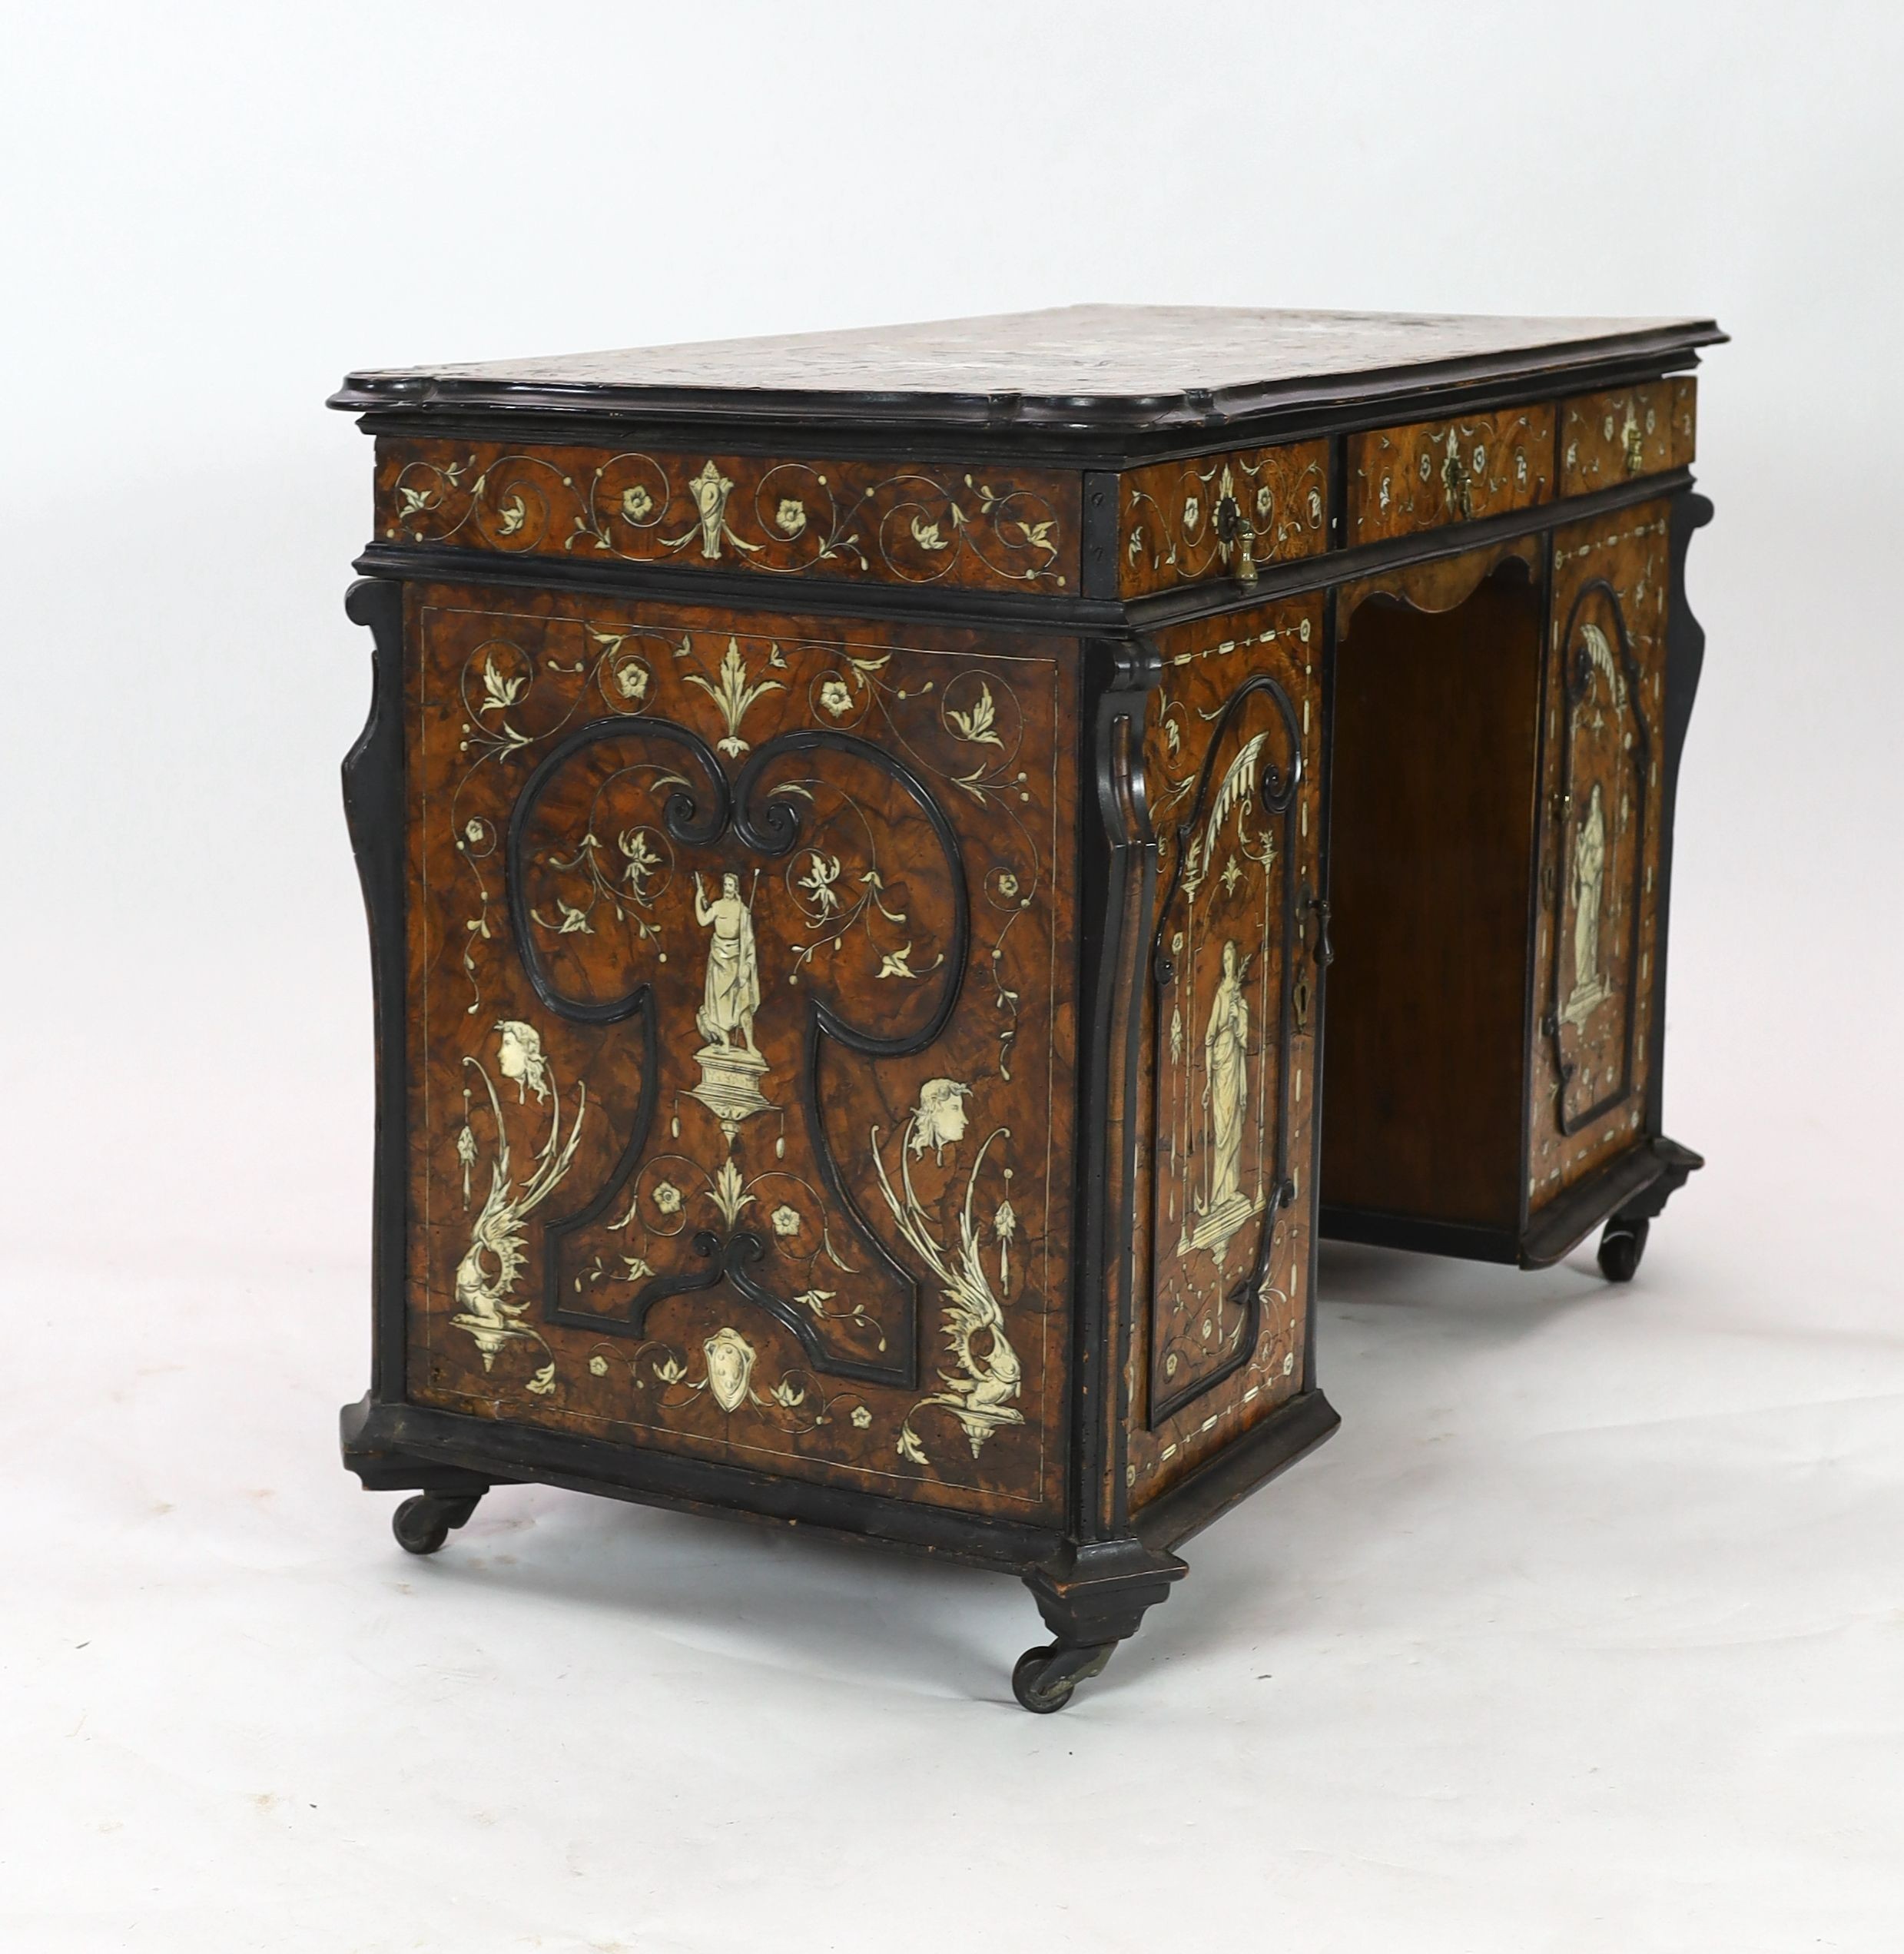 An important 18th century Lombardy ebony banded walnut and ivory inlaid twin pedestal desk, the top and sides inlaid with a scenes from Homer’s Iliad, after original drawings by John Flaxman RA (1755-1826), width 118cm d